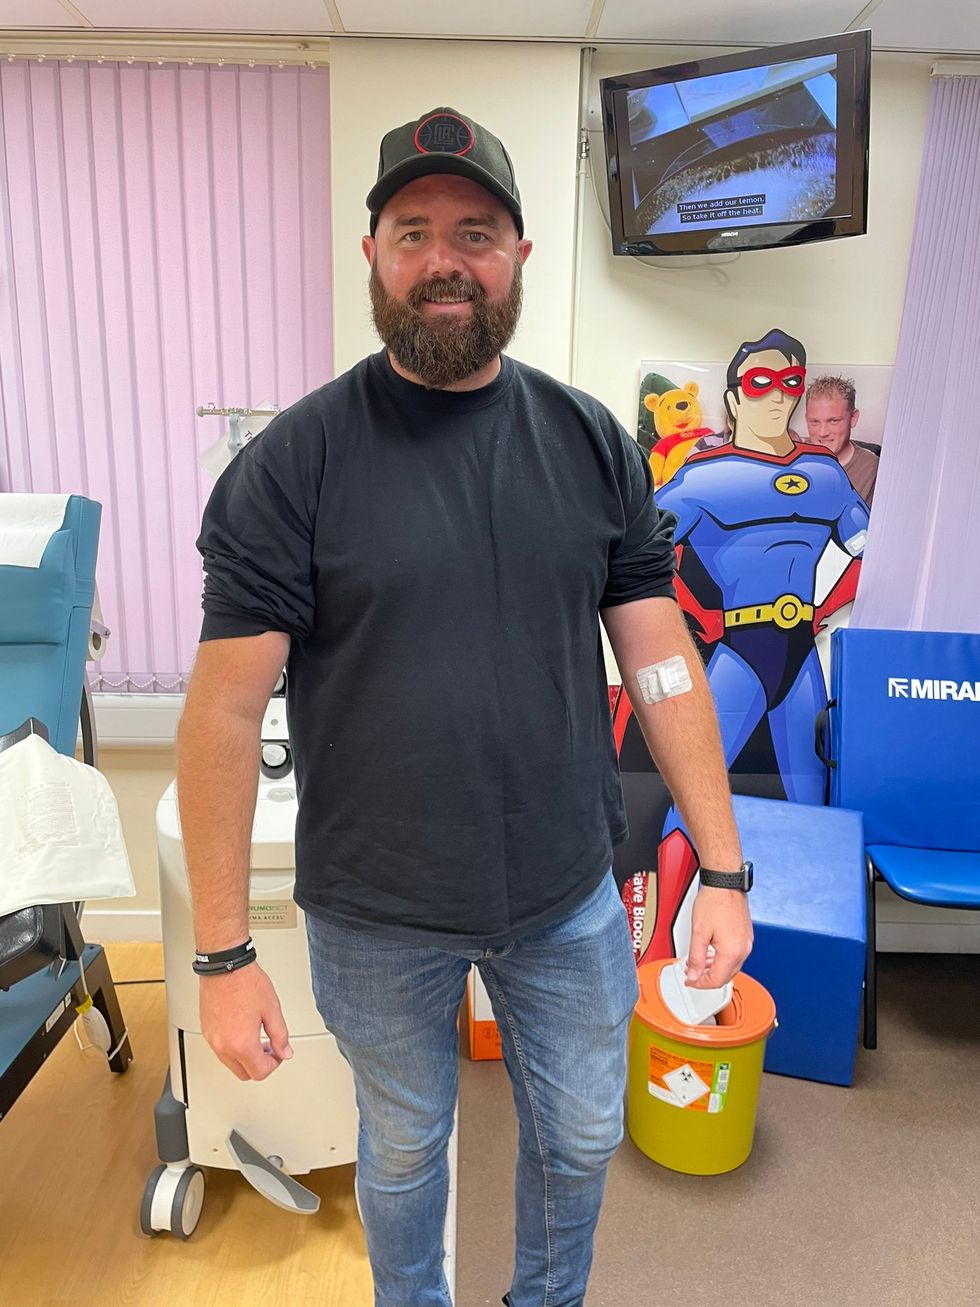 Carl Etherington, from Castleford, West Yorkshire, gave blood during Saturday's campaign and said the atmosphere at the donor centre was 